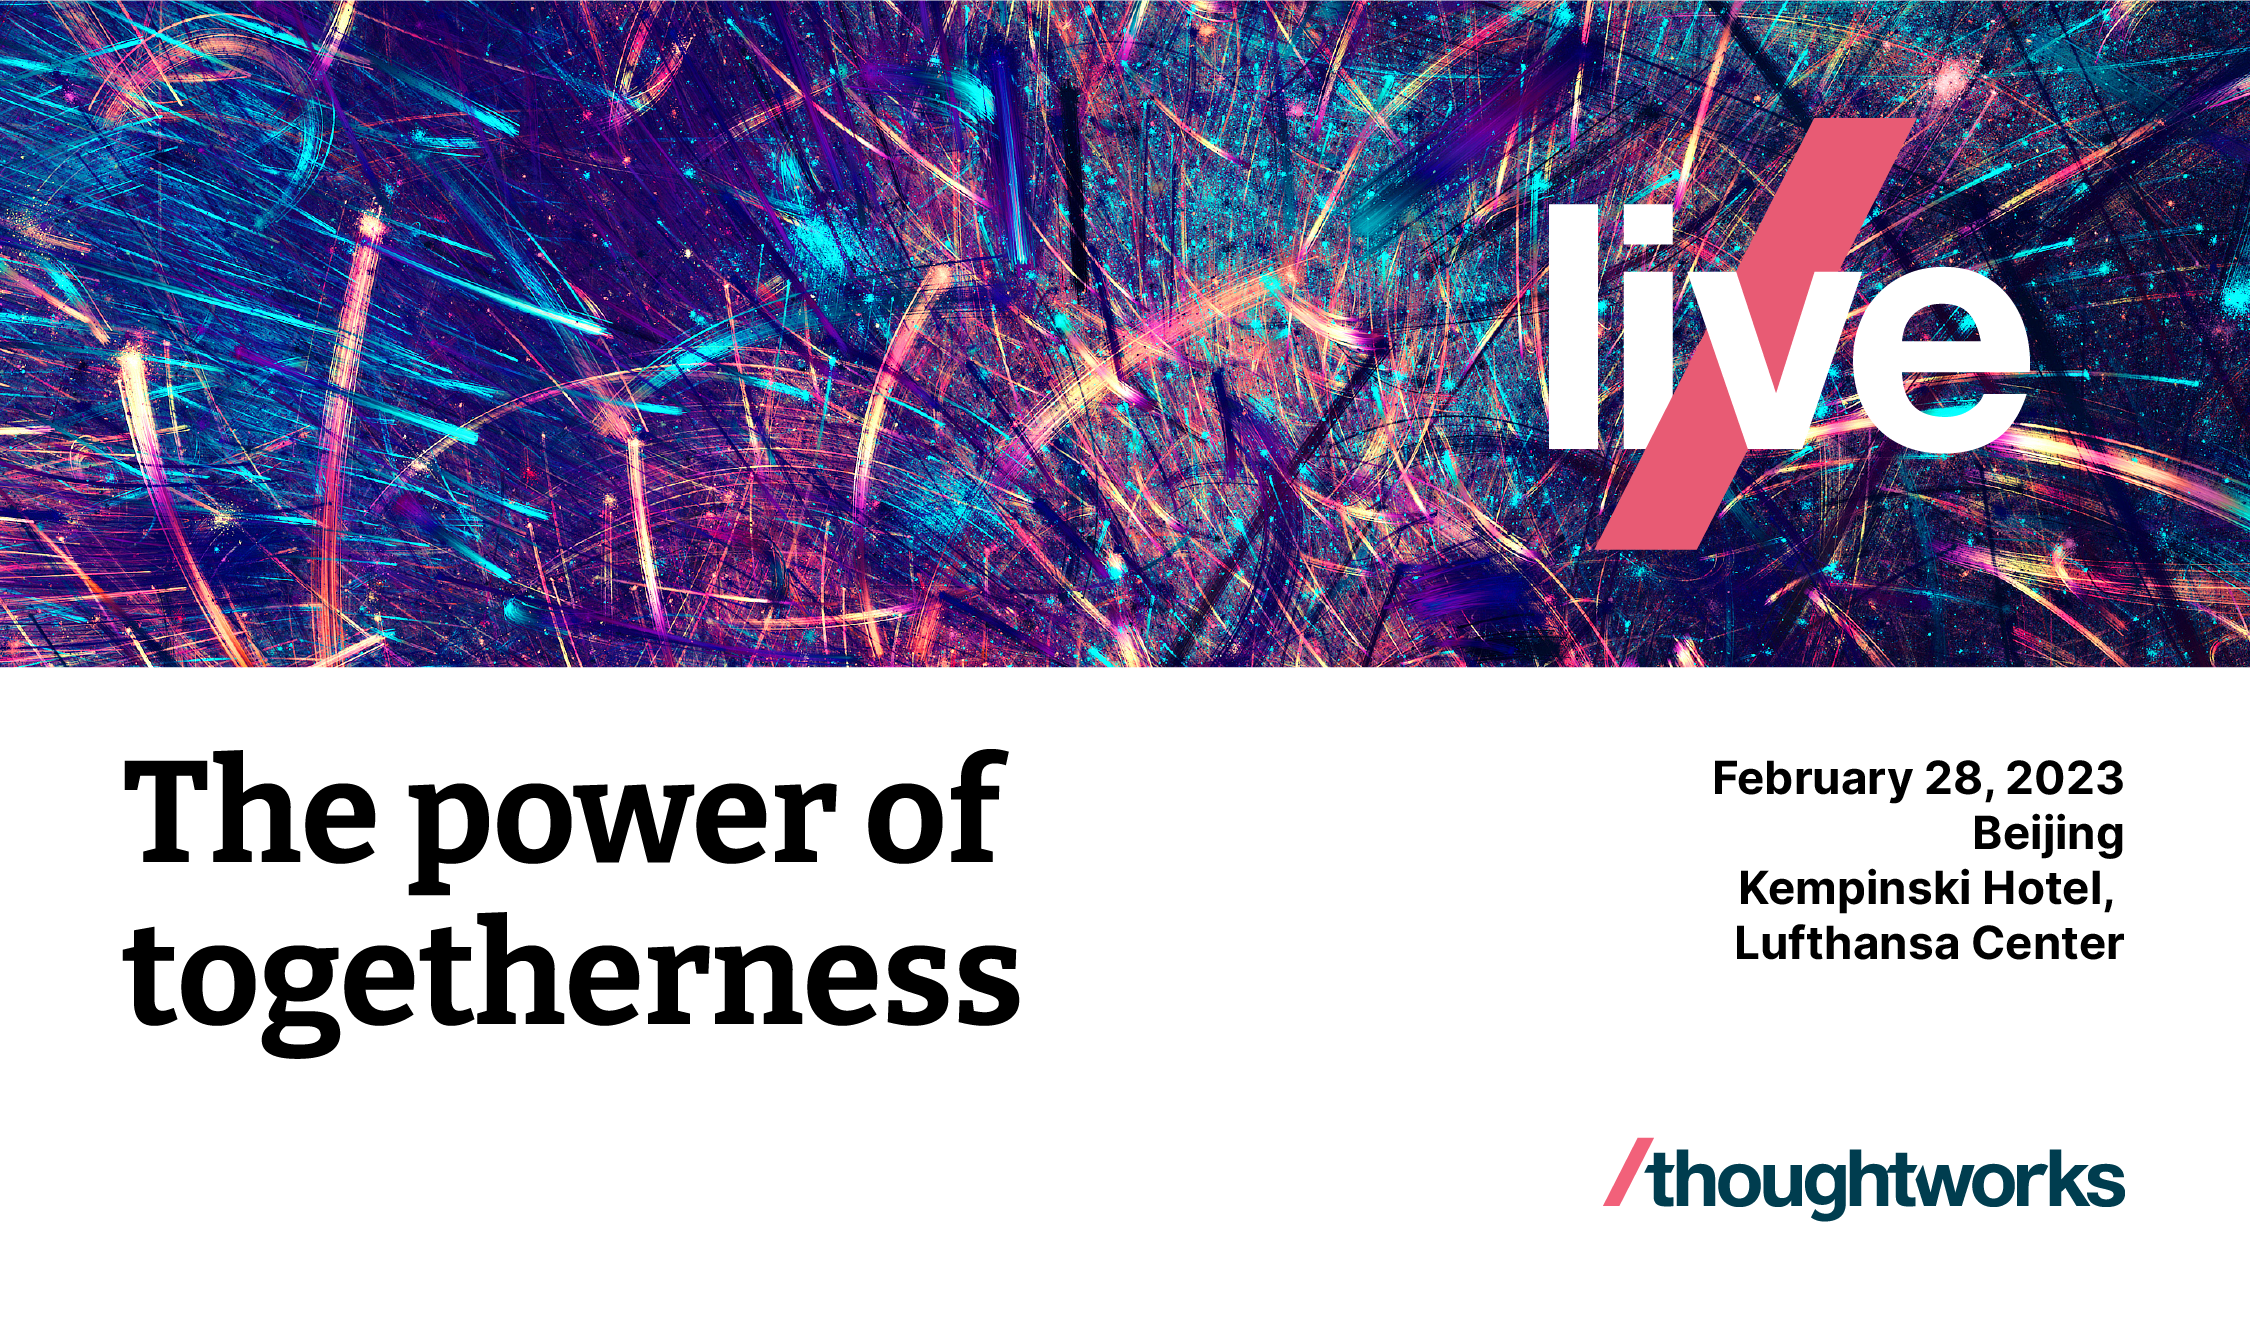 2023 Thoughtworks Live  ｜ The power of togetherness